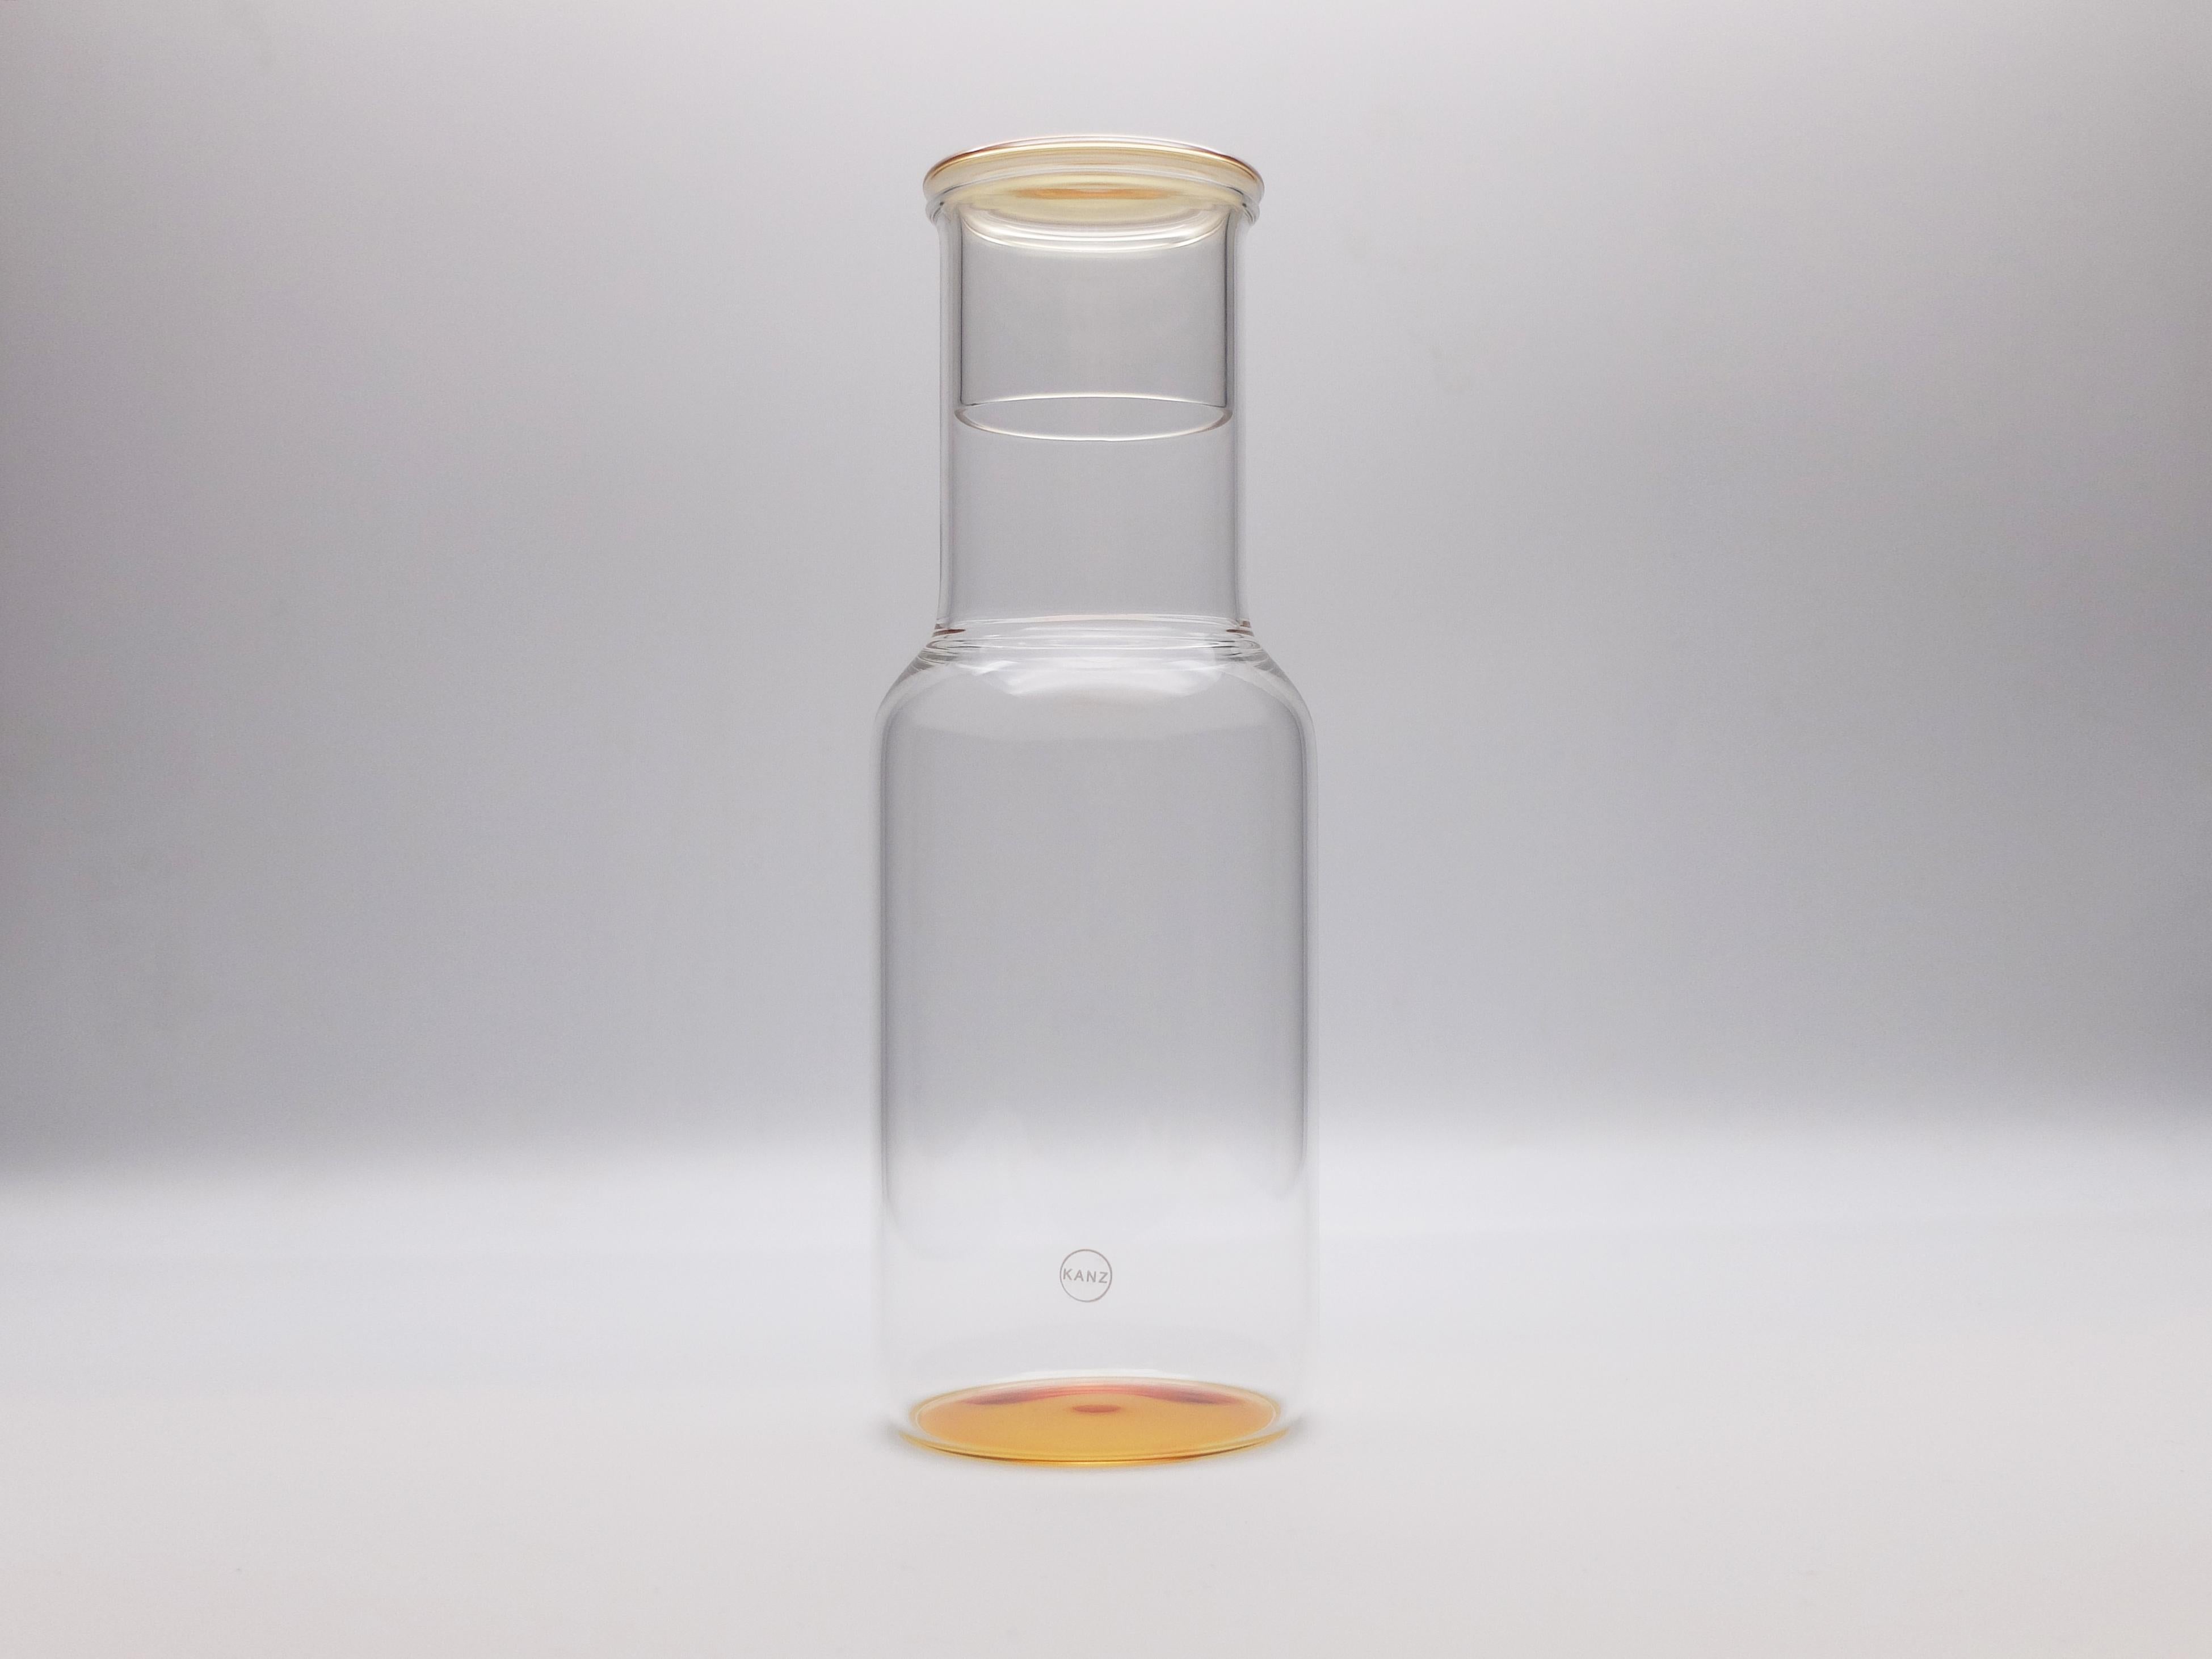 The Iride bottle in borosilicate glass, is handmade by master glass makers.
Each piece is unique and is characterized by extreme transparency. The bottom and the cap are painted by hand. The cap can be used as a glass.
Minimal variations in shape,